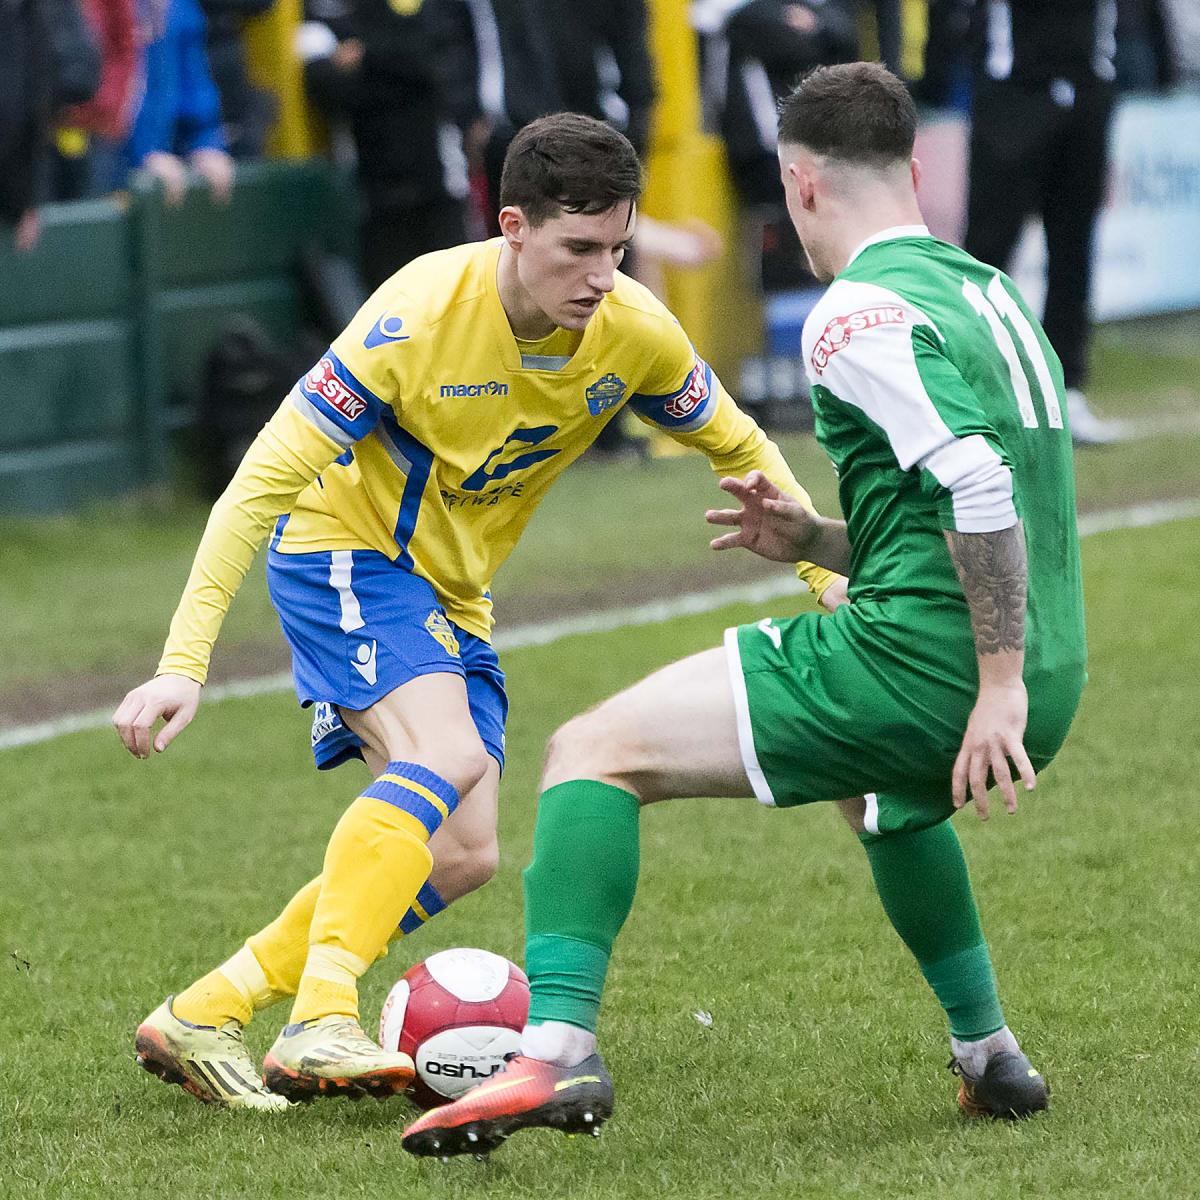 All the action from Warrington Town's 2-1 victory over Frickley Athletic. Pictures by John Hopkins.